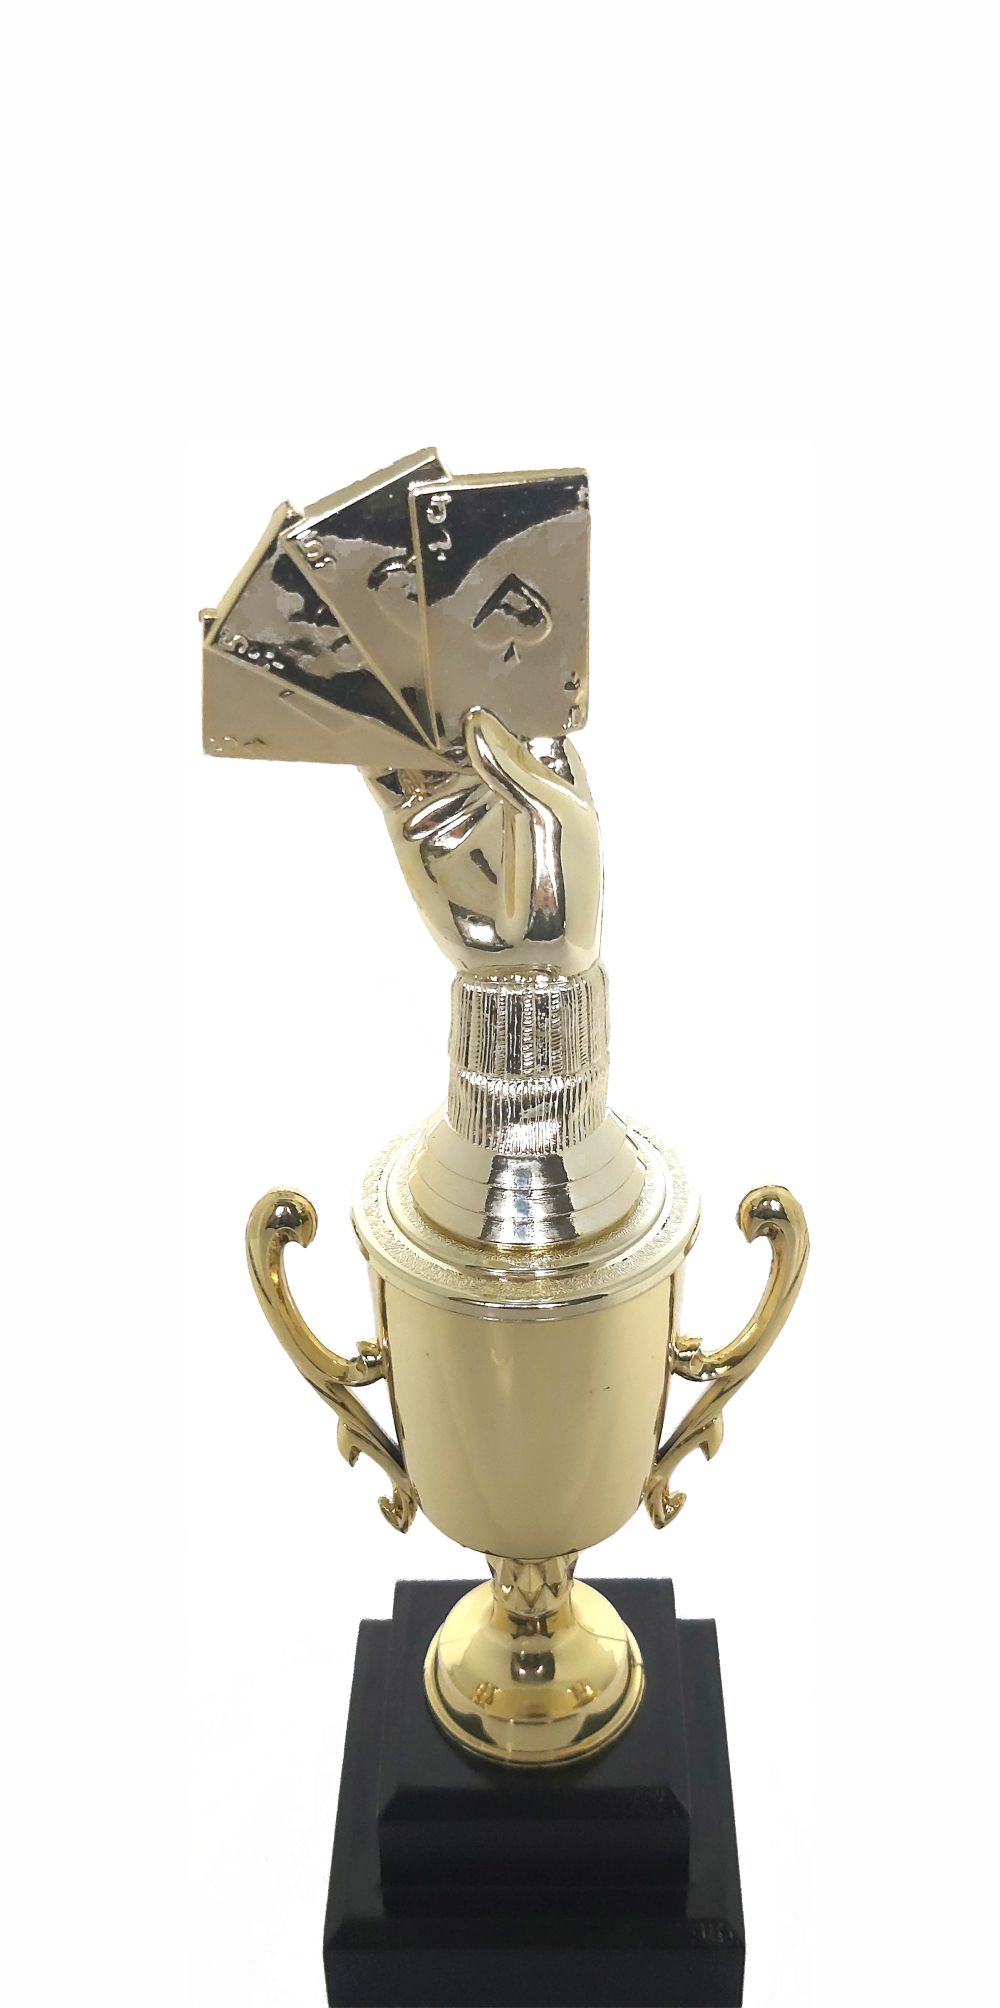 Cards Aces Hand Trophy 275mm